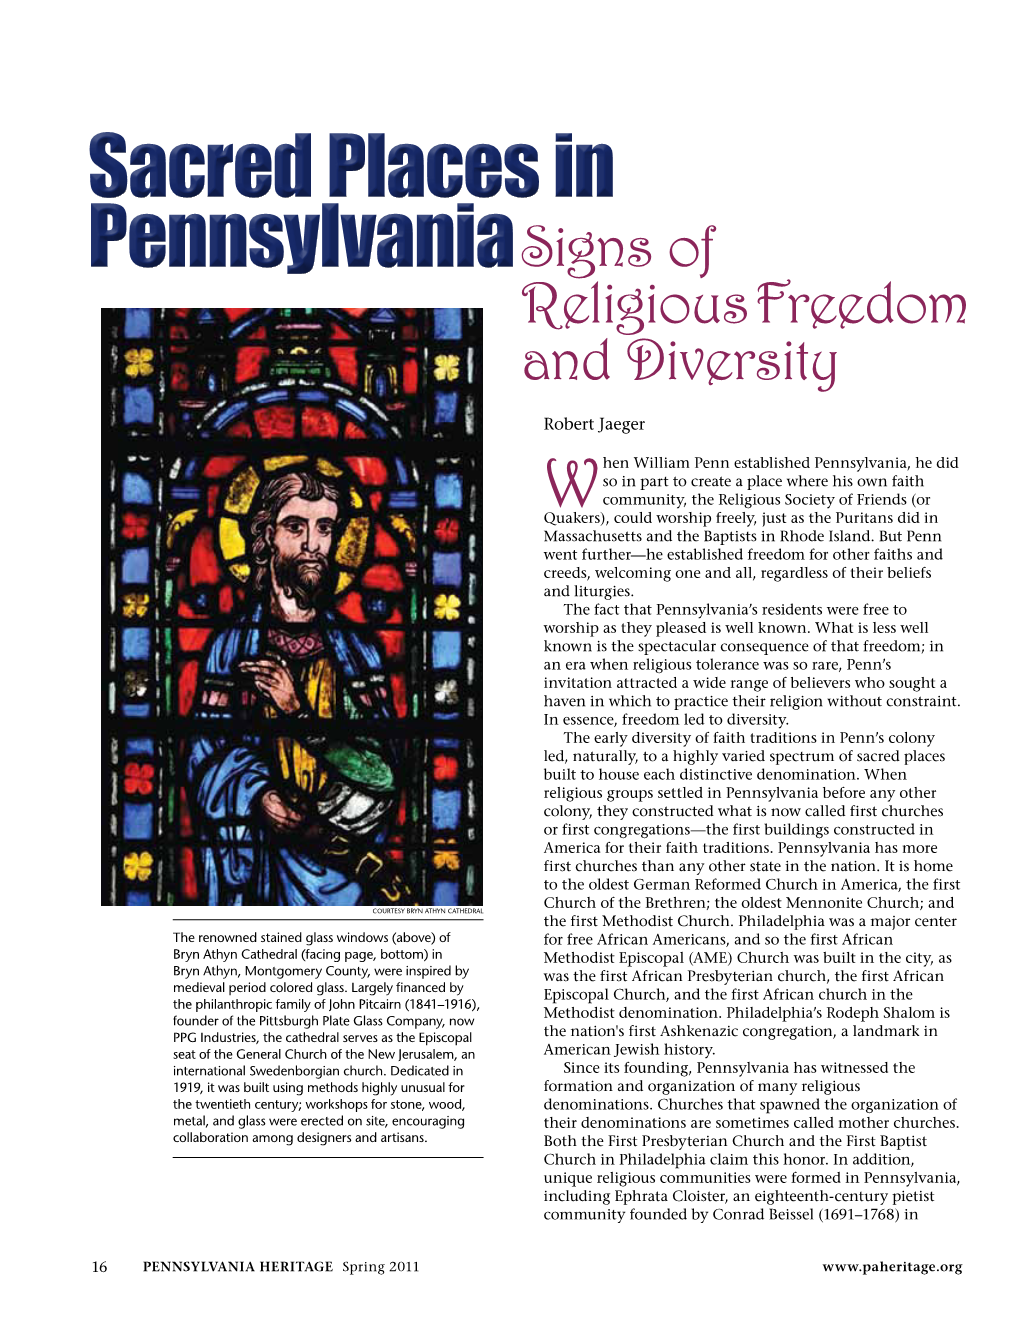 Sacred Places in Pennsylvaniasigns of Religiousfreedom and Diversity